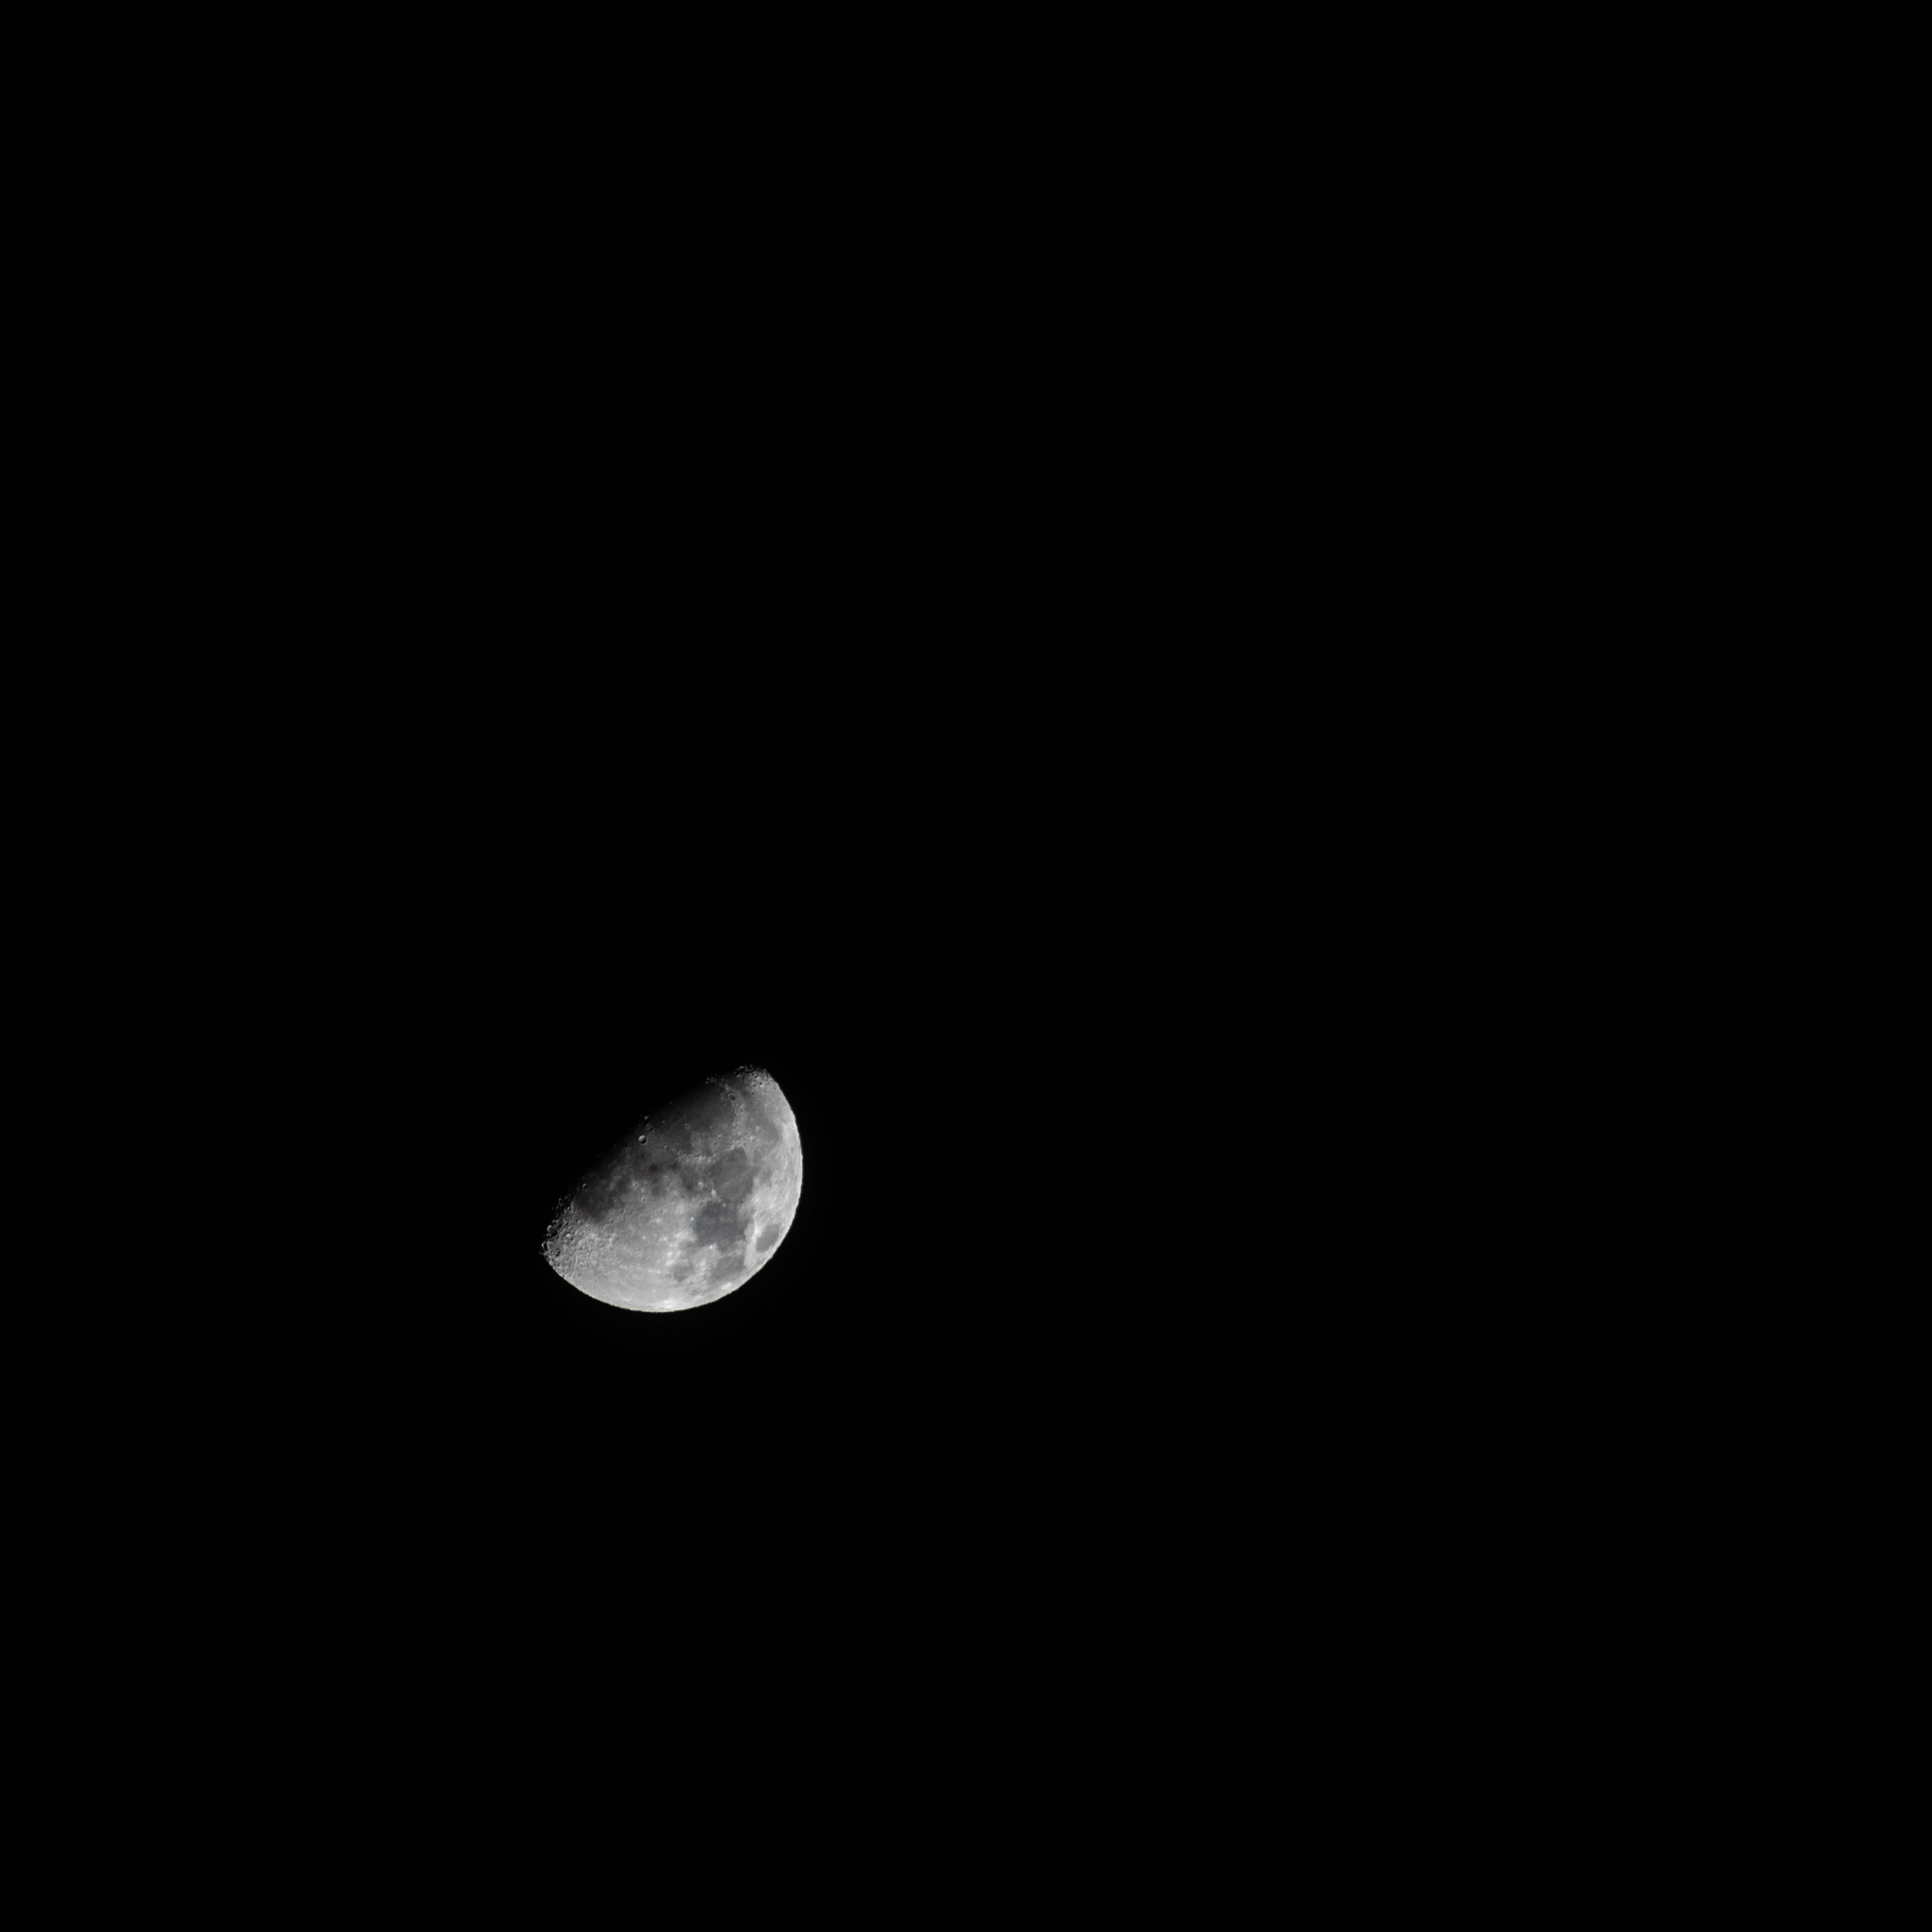 android chb, sky, universe, night, moon, bw, full moon, satellite